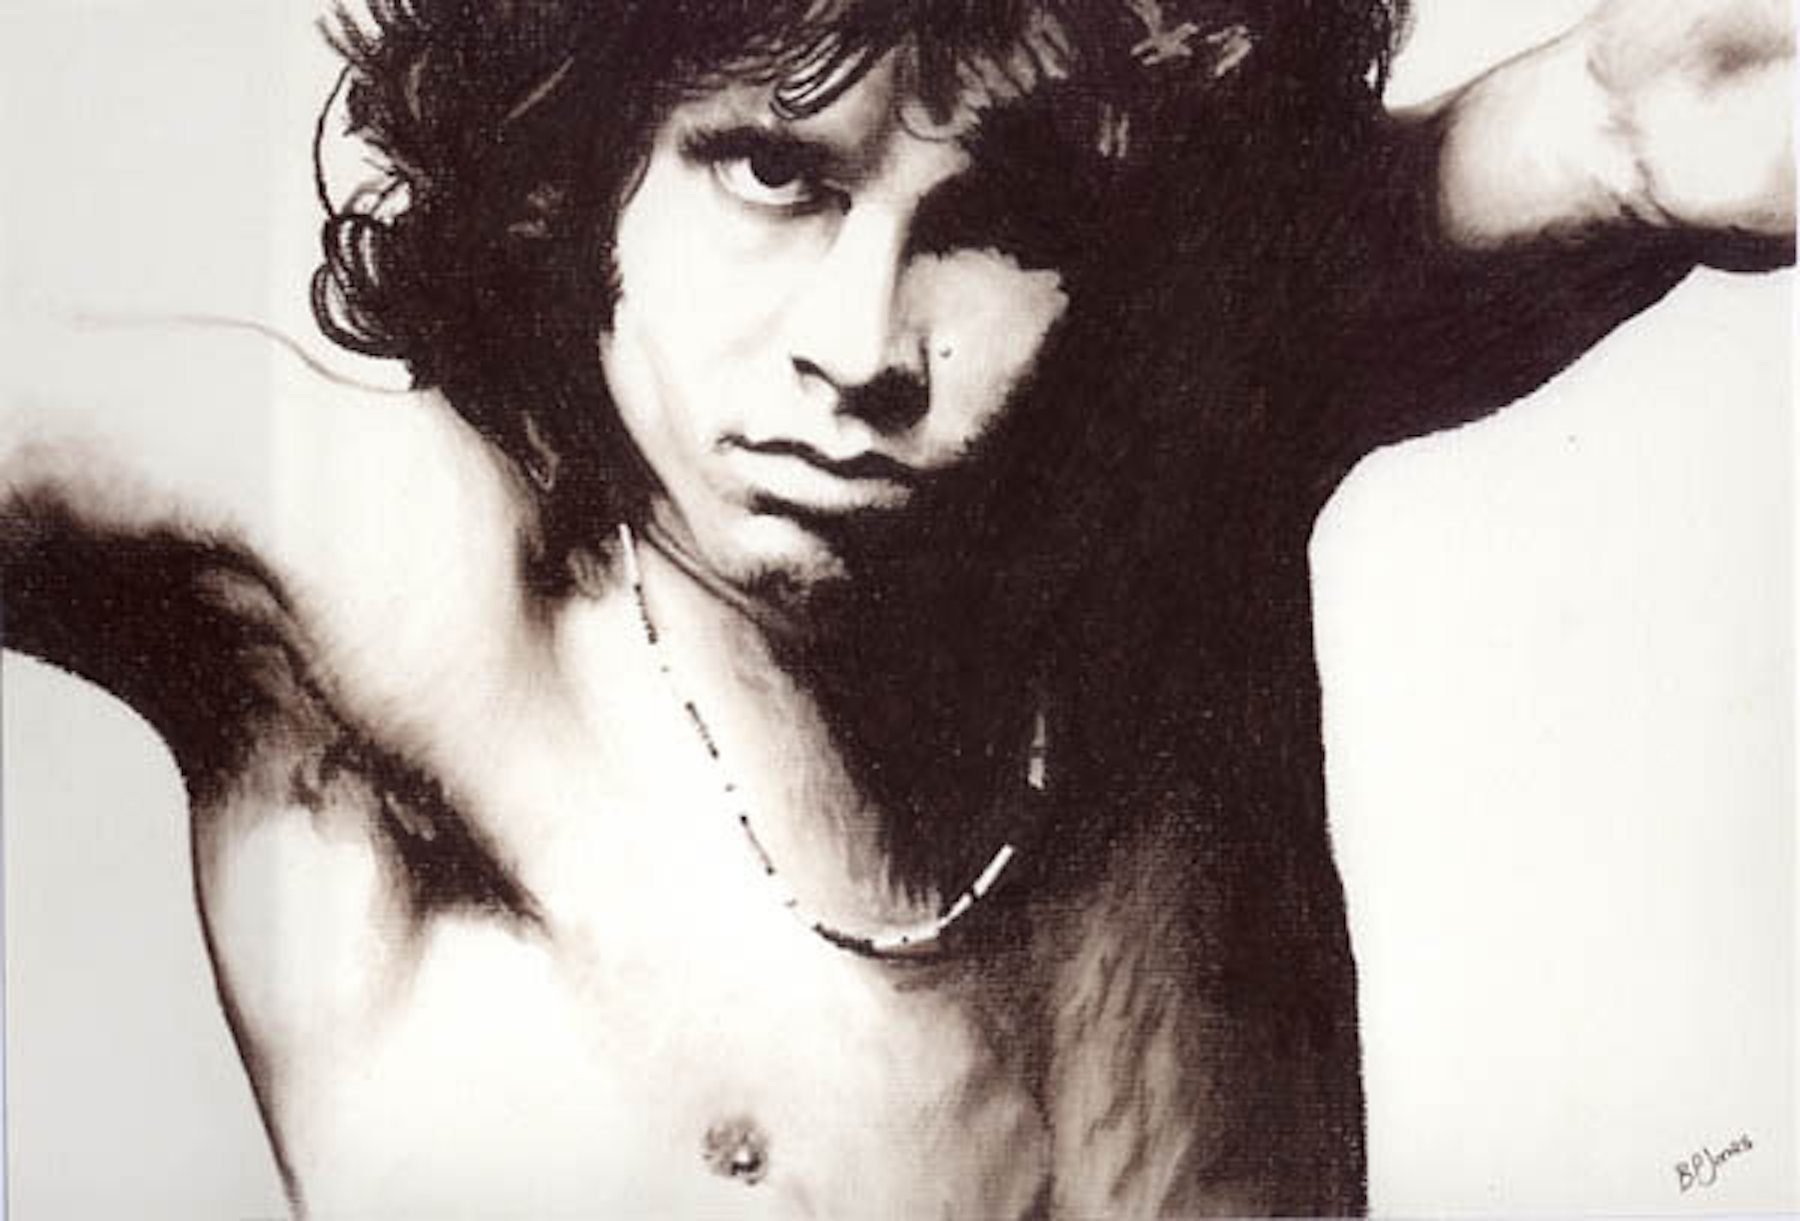 The Door's Jim Morrison pictured in black and white shirtless glaring back at the camera